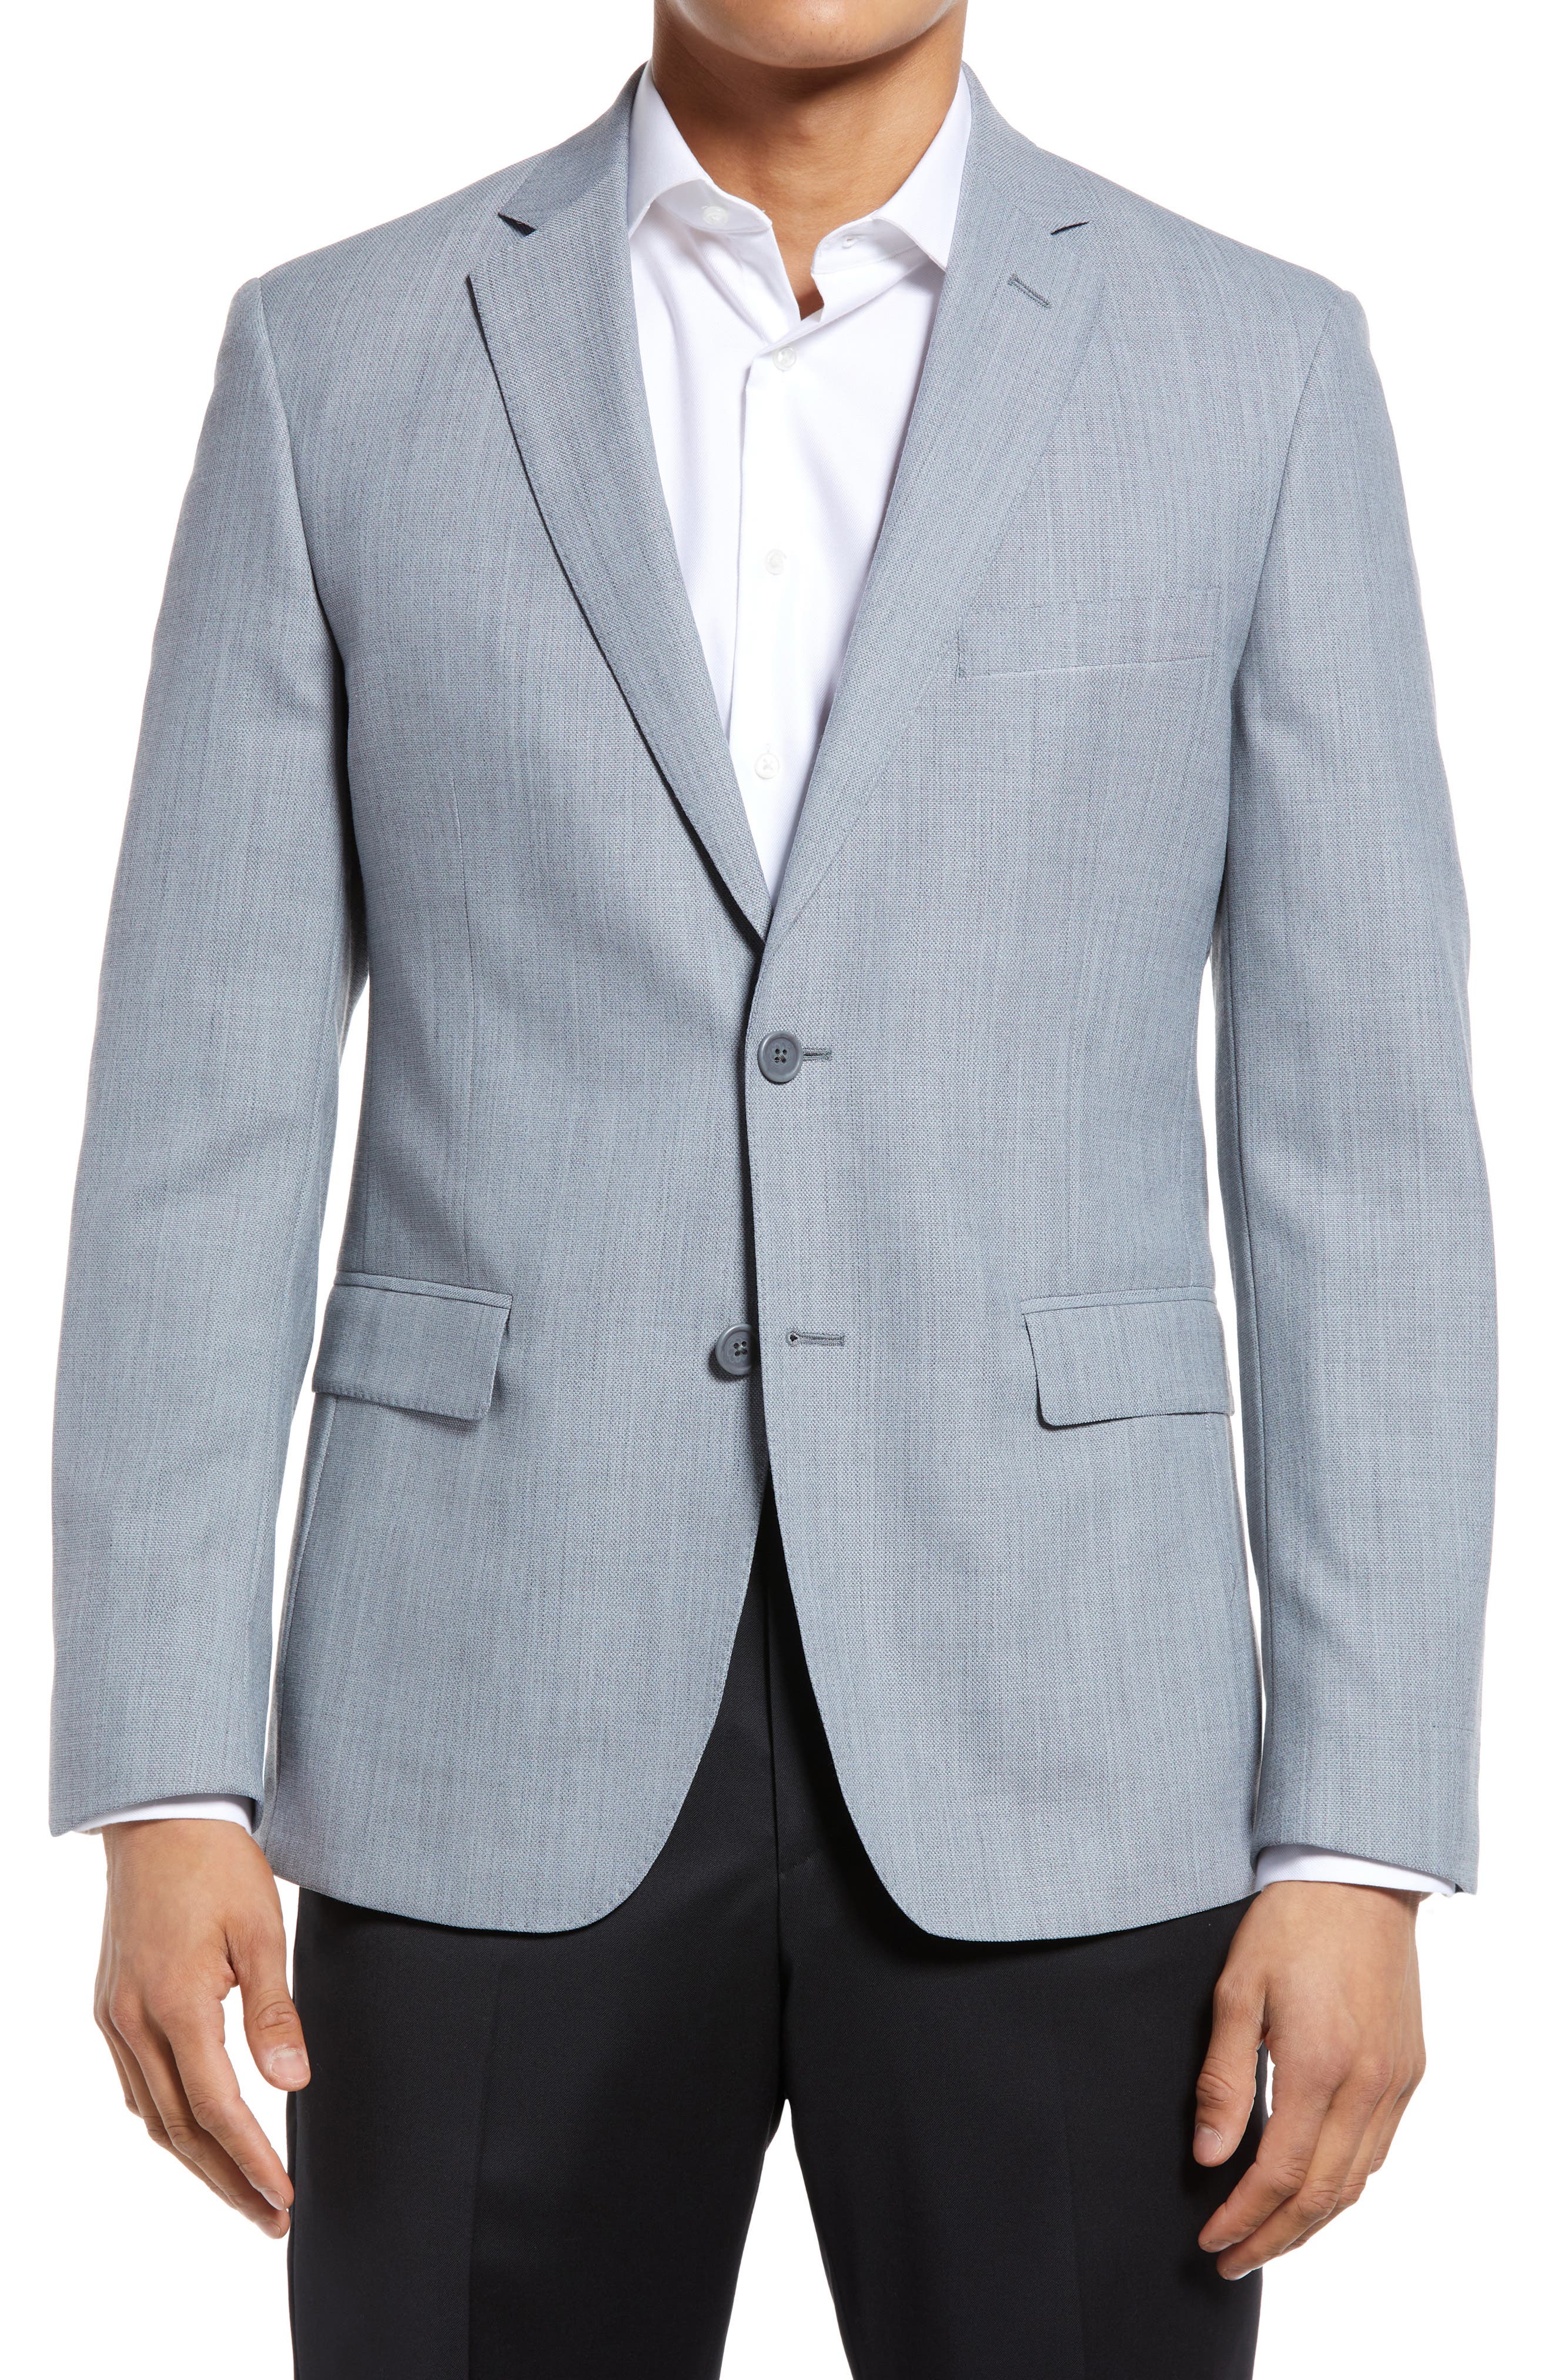 JB Britches Wool Blend Sport Coat in Grey at Nordstrom